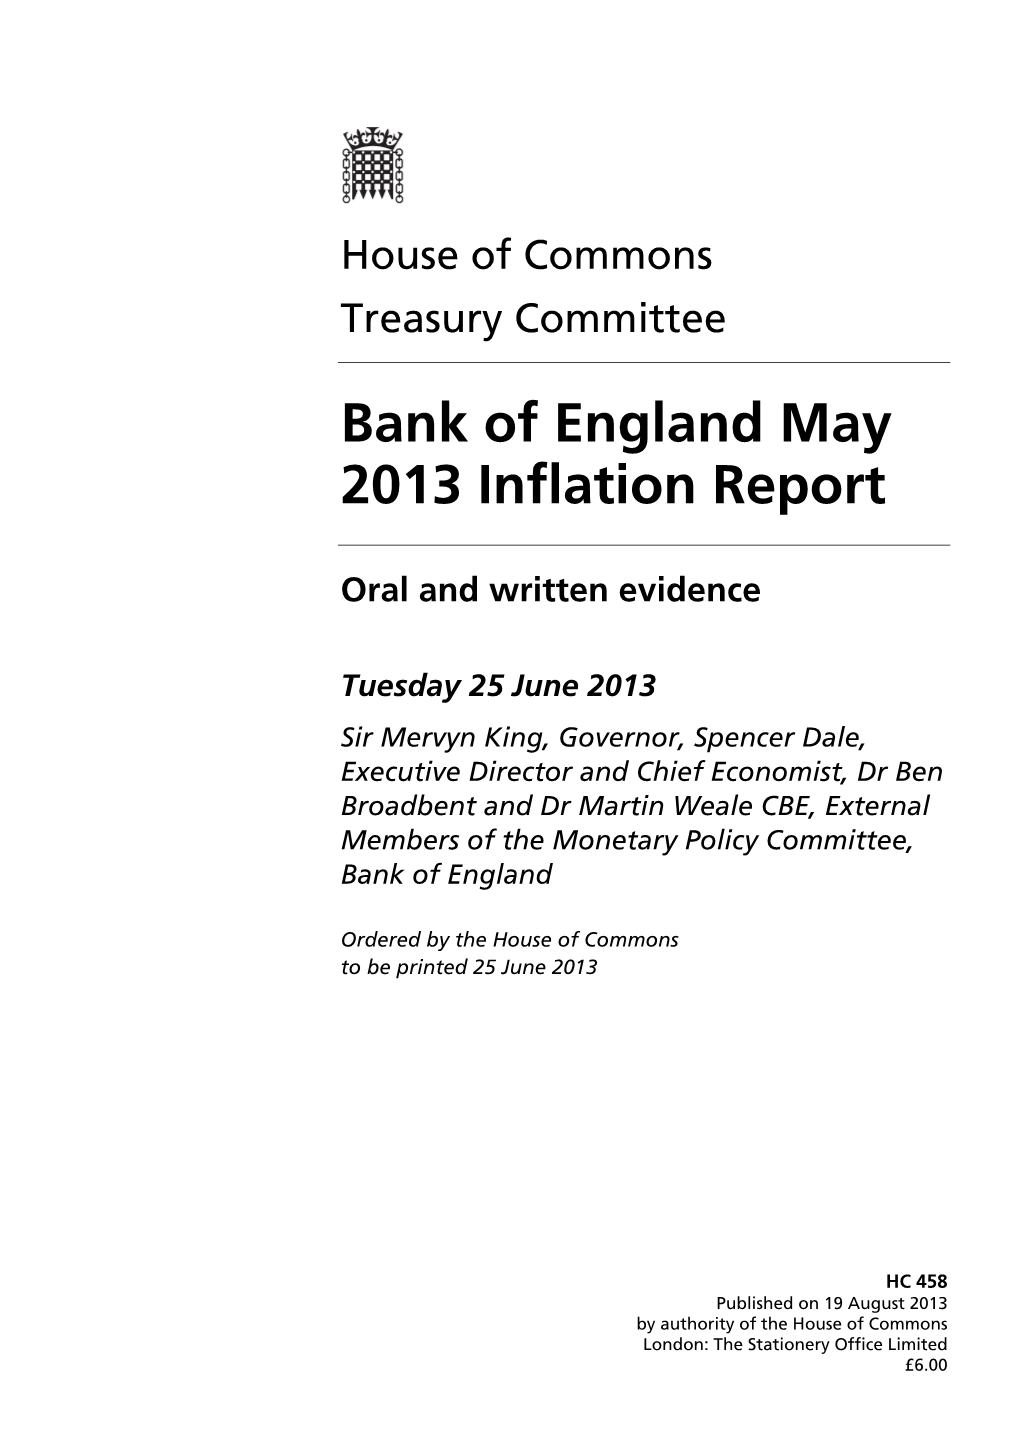 Bank of England May 2013 Inflation Report